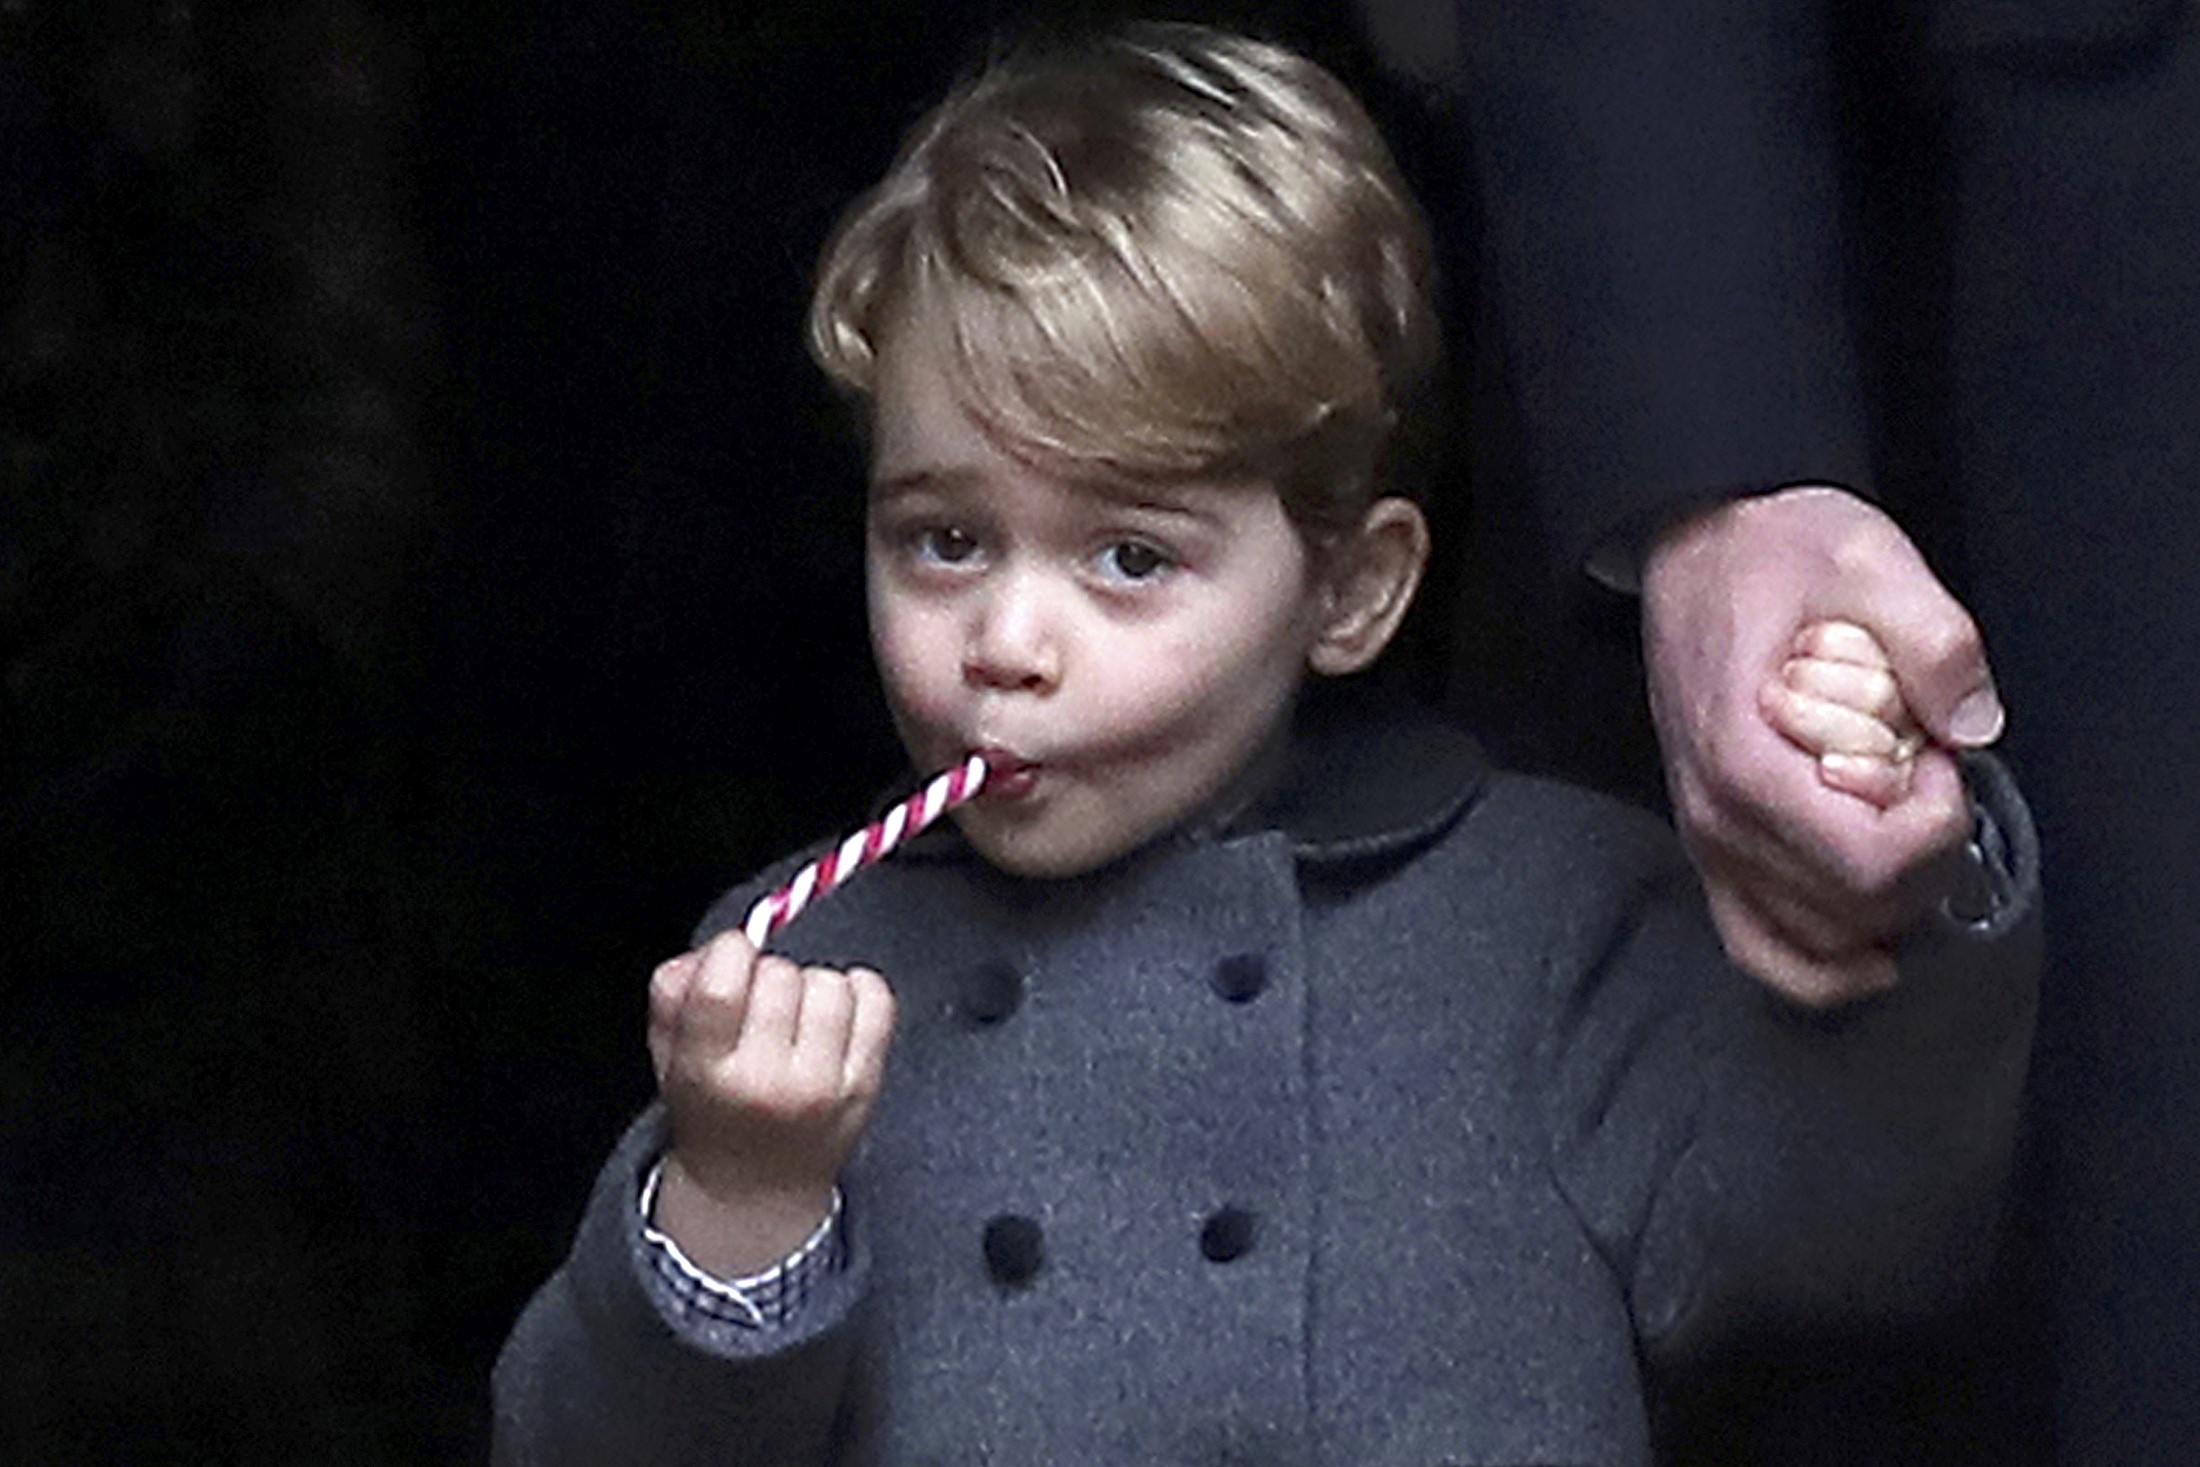 Prince George, the son of the Duke and Duchess of Cambridge, sucks a sweet following the 2016 Christmas Day service at St Mark’s Church in Englefield, near Bucklebury in southern England. Photo: Reuters